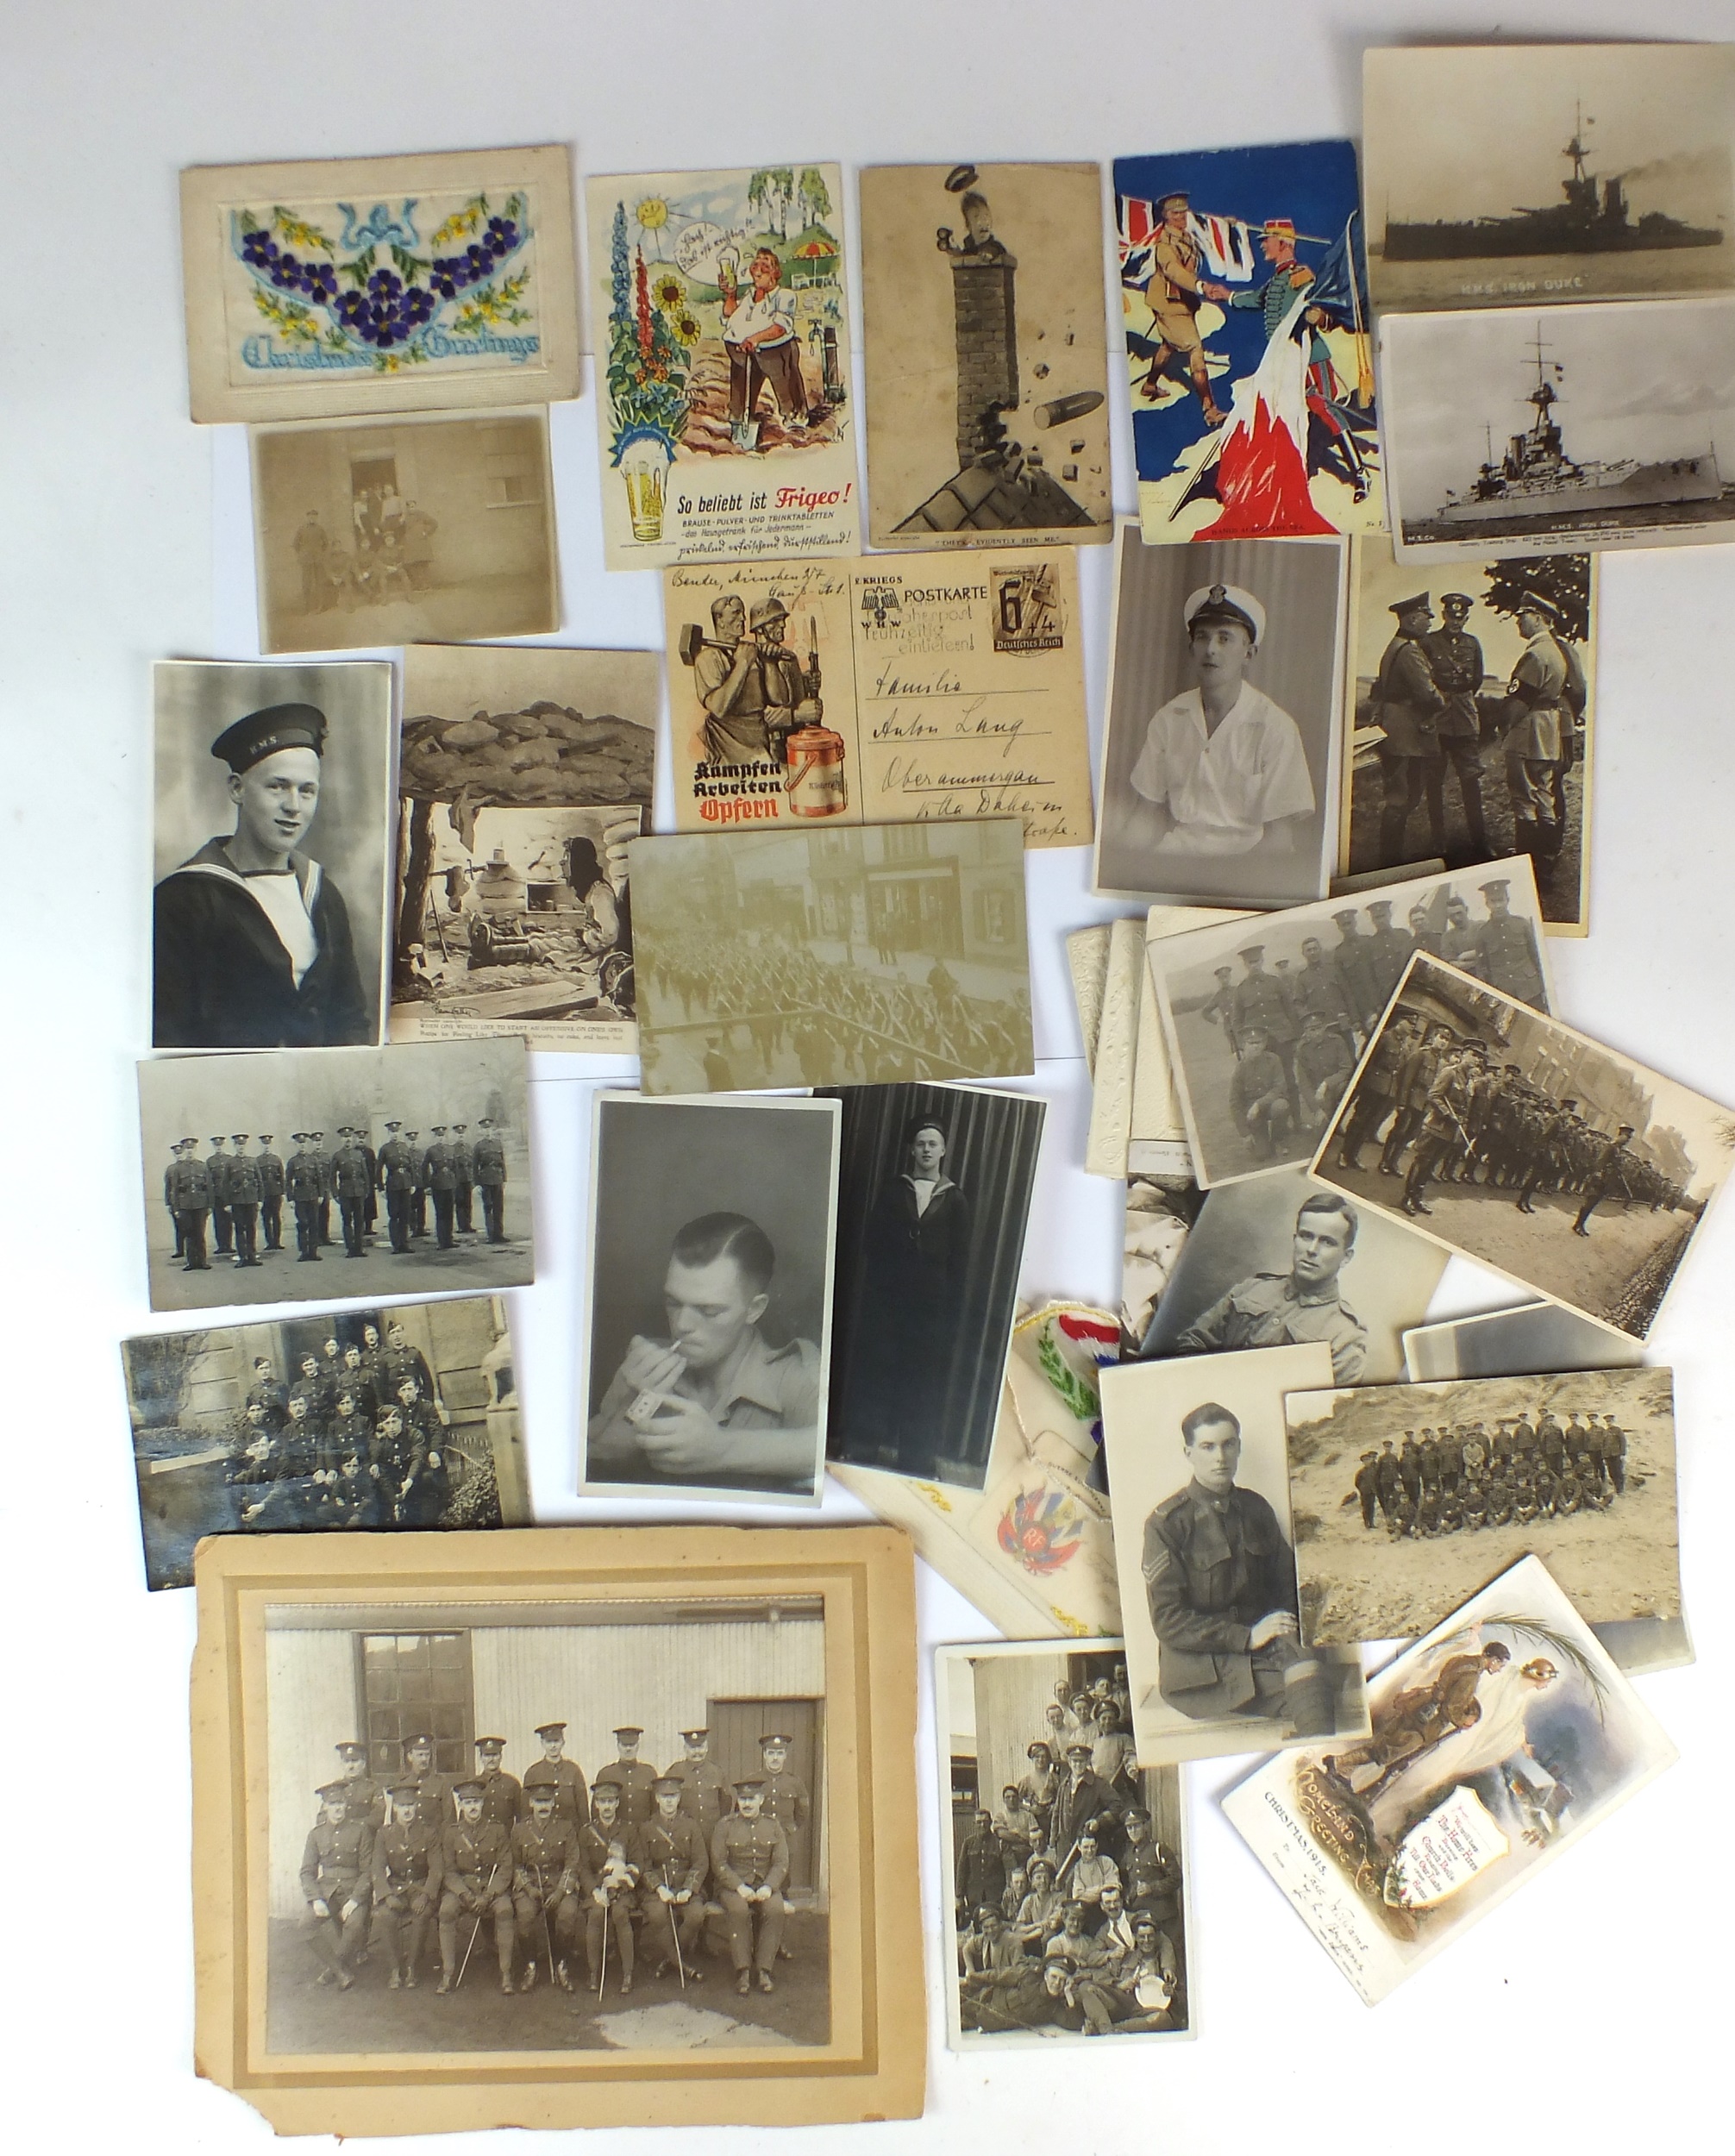 Scarce set of 'Shanghai Trouble' postcards with other military-related postcards and photographs. - Image 2 of 2